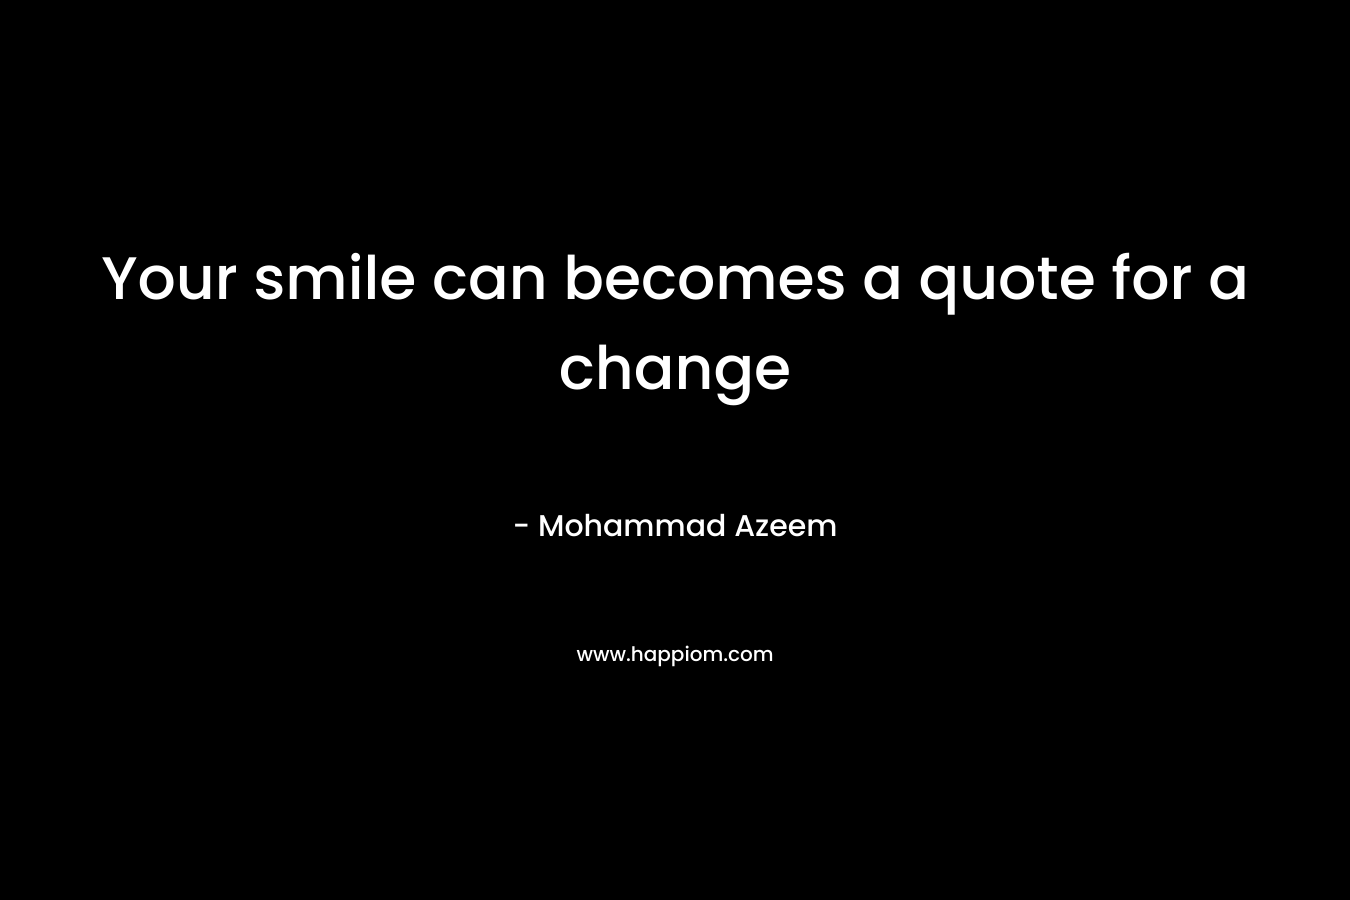 Your smile can becomes a quote for a change